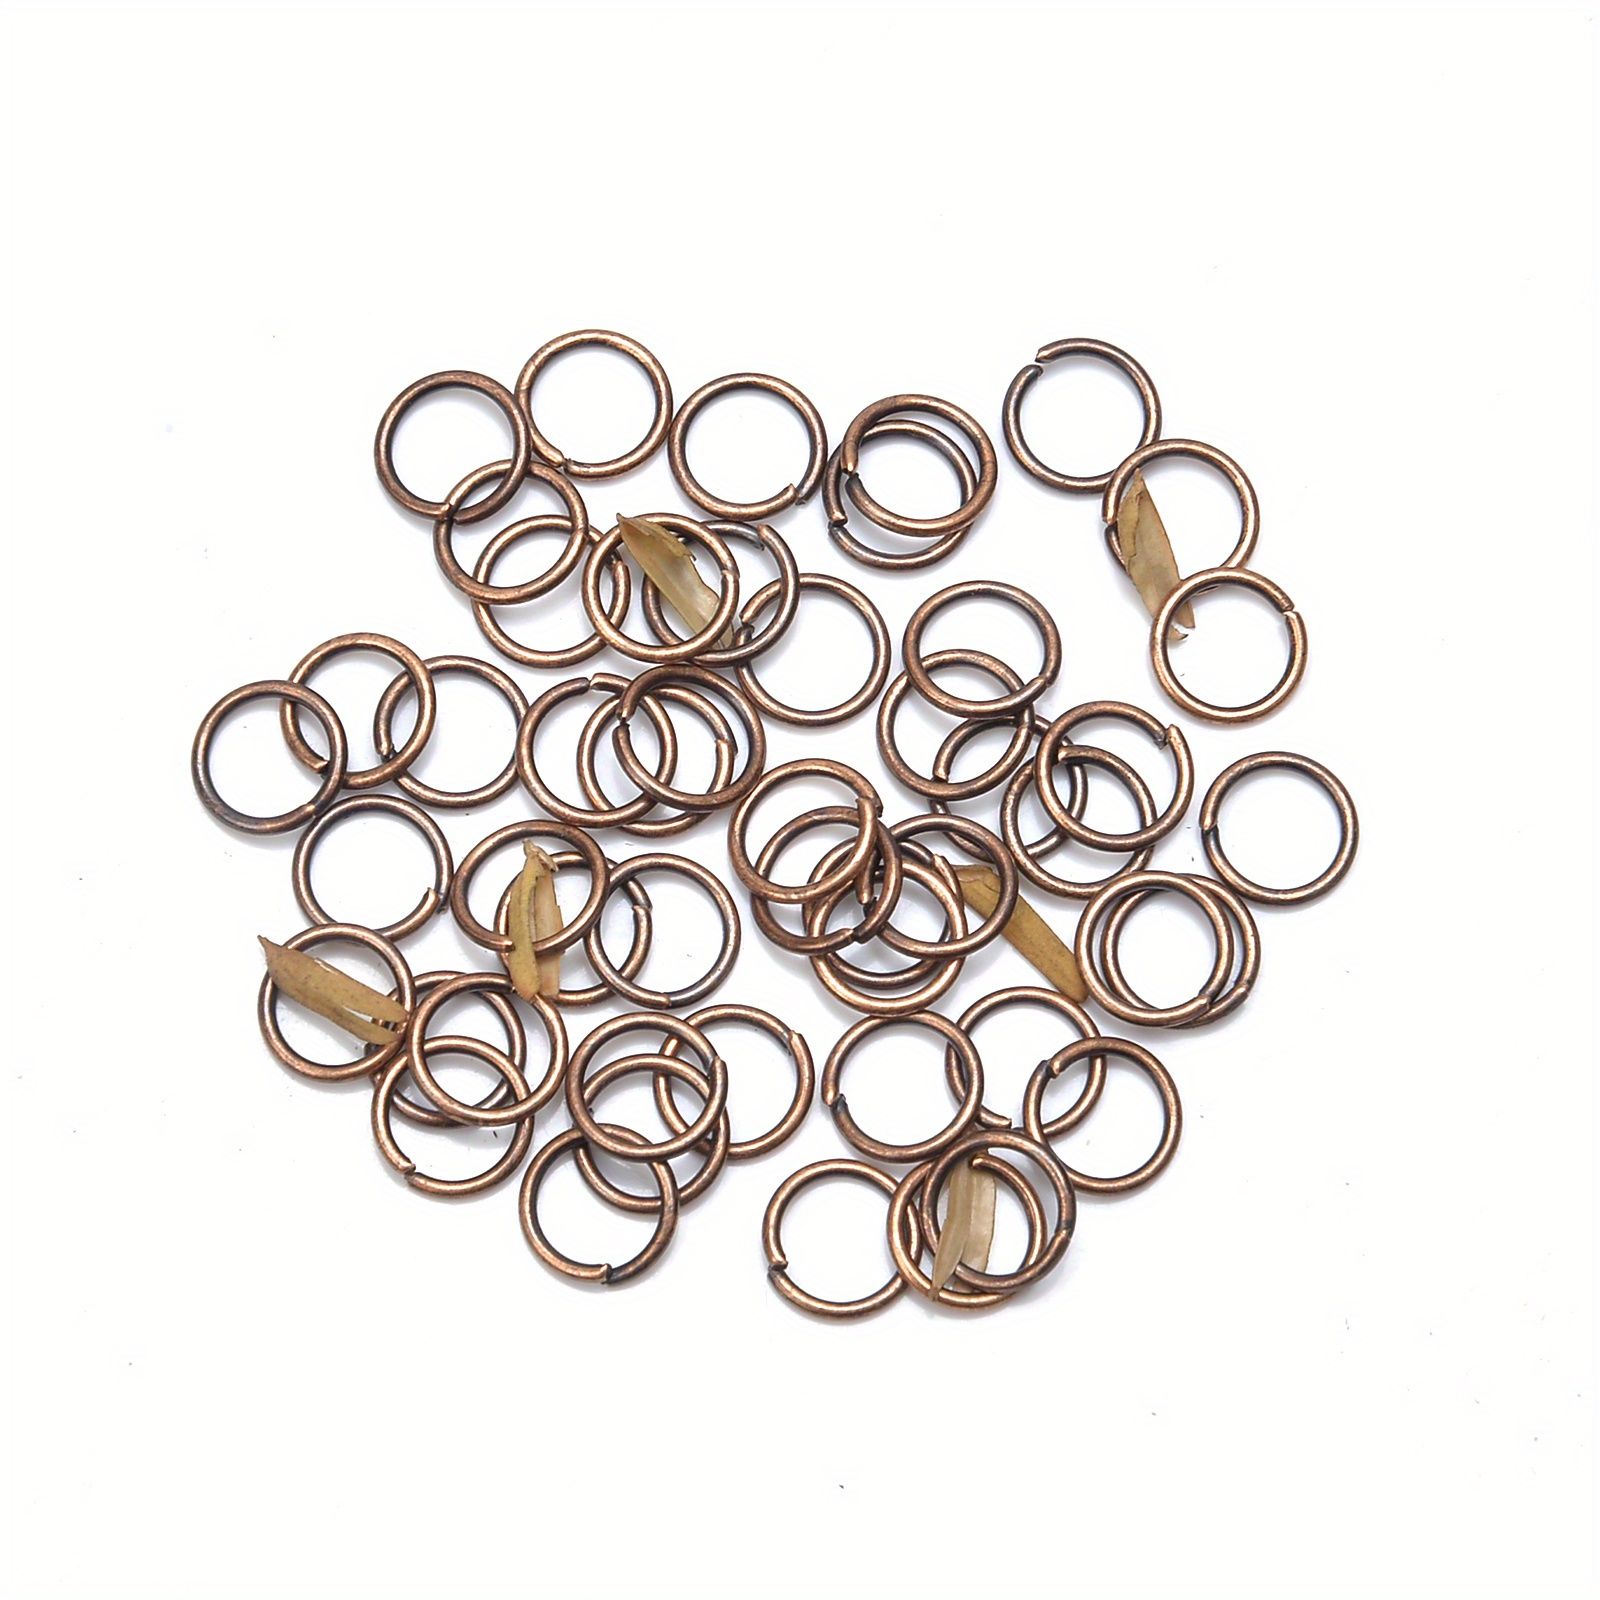 2840 Pieces Jump Rings for Jewelry Making, Shynek Open Jump Rings